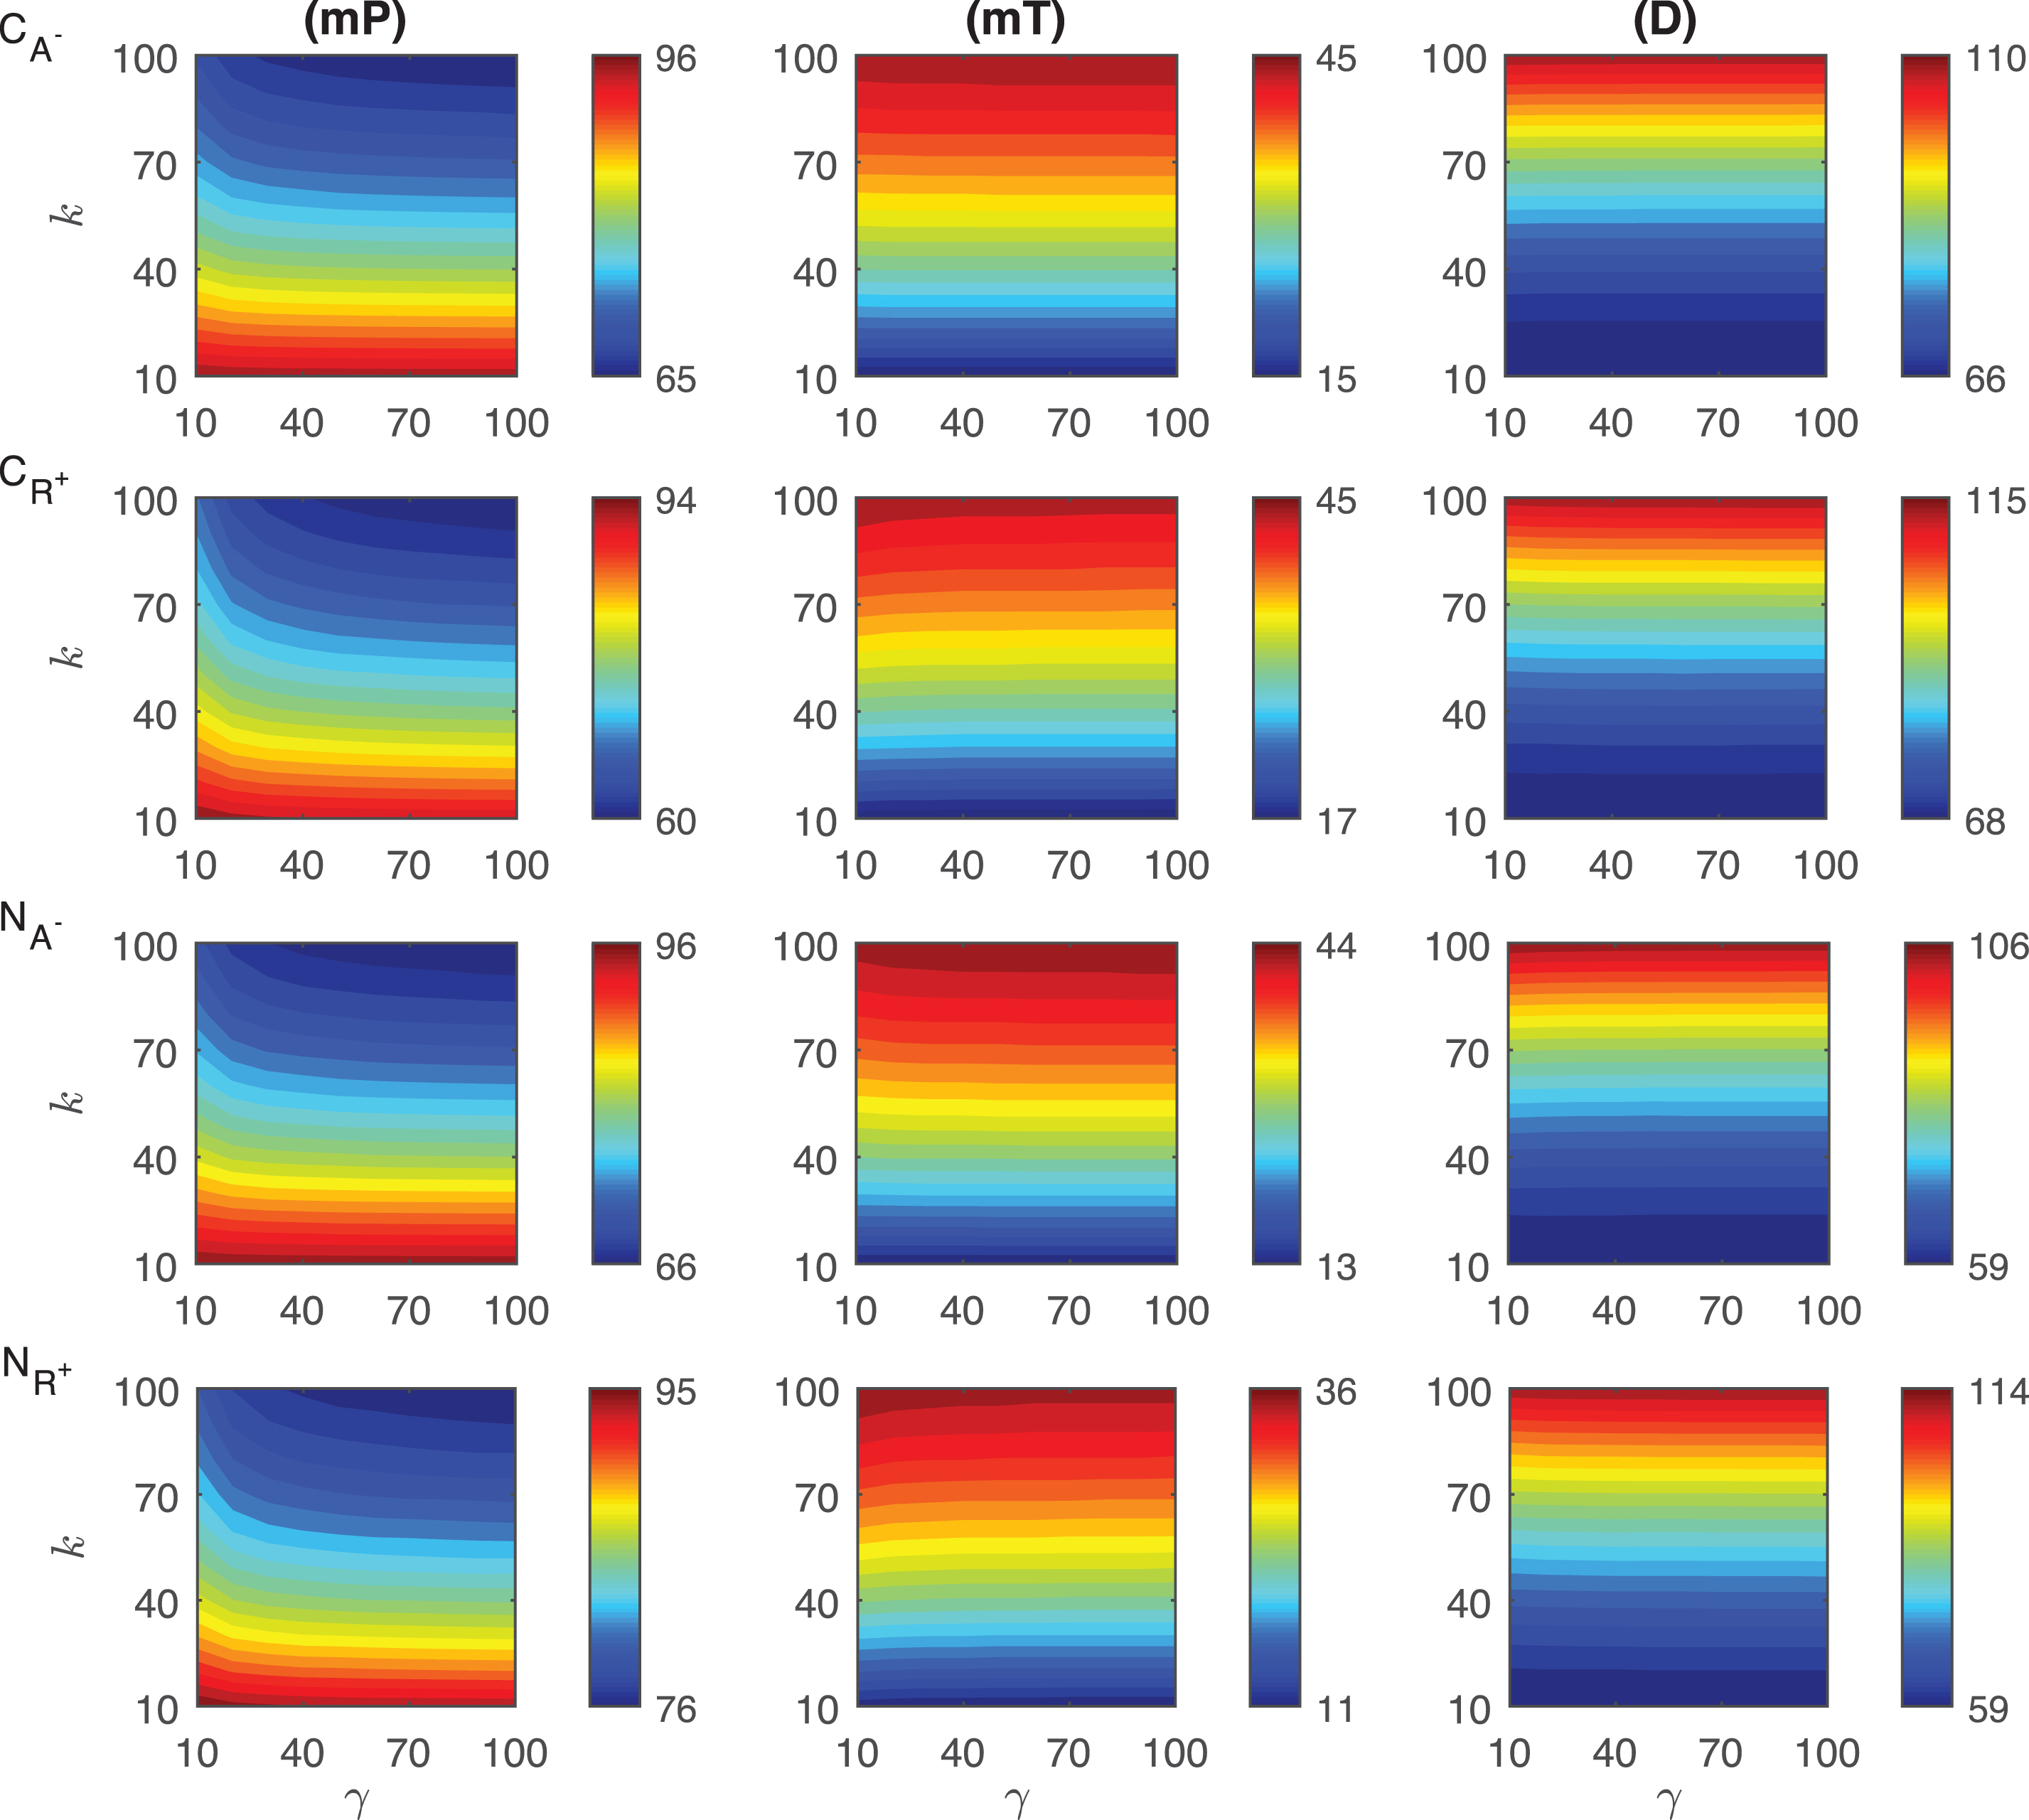 Heat maps for the comparison of three metrics (mid-protein level mP, time to reach mid-protein level mT and duration D) describing the dynamics of competitive (CA−, CR+) and noncompetitive (NA−, NR+) inhibition mechanisms. In these simulations, the signal amplitude γ and persistency k range from a 10-fold to a 100-fold change when ro = 0.001. All the other parameters were held constant at their values listed in Section 3.